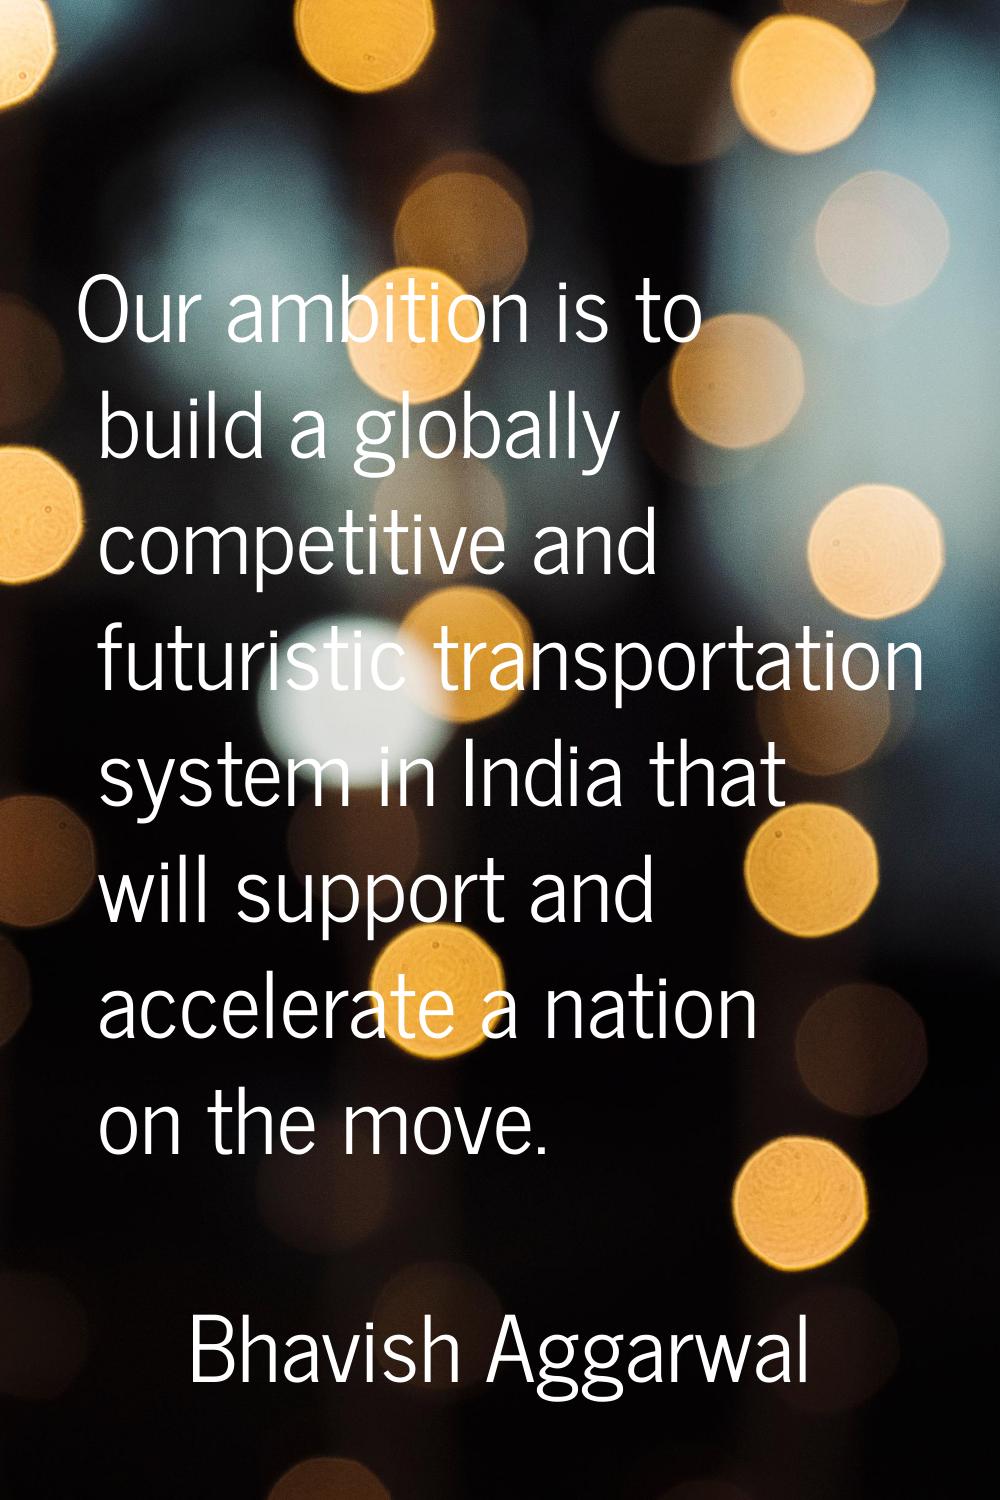 Our ambition is to build a globally competitive and futuristic transportation system in India that 